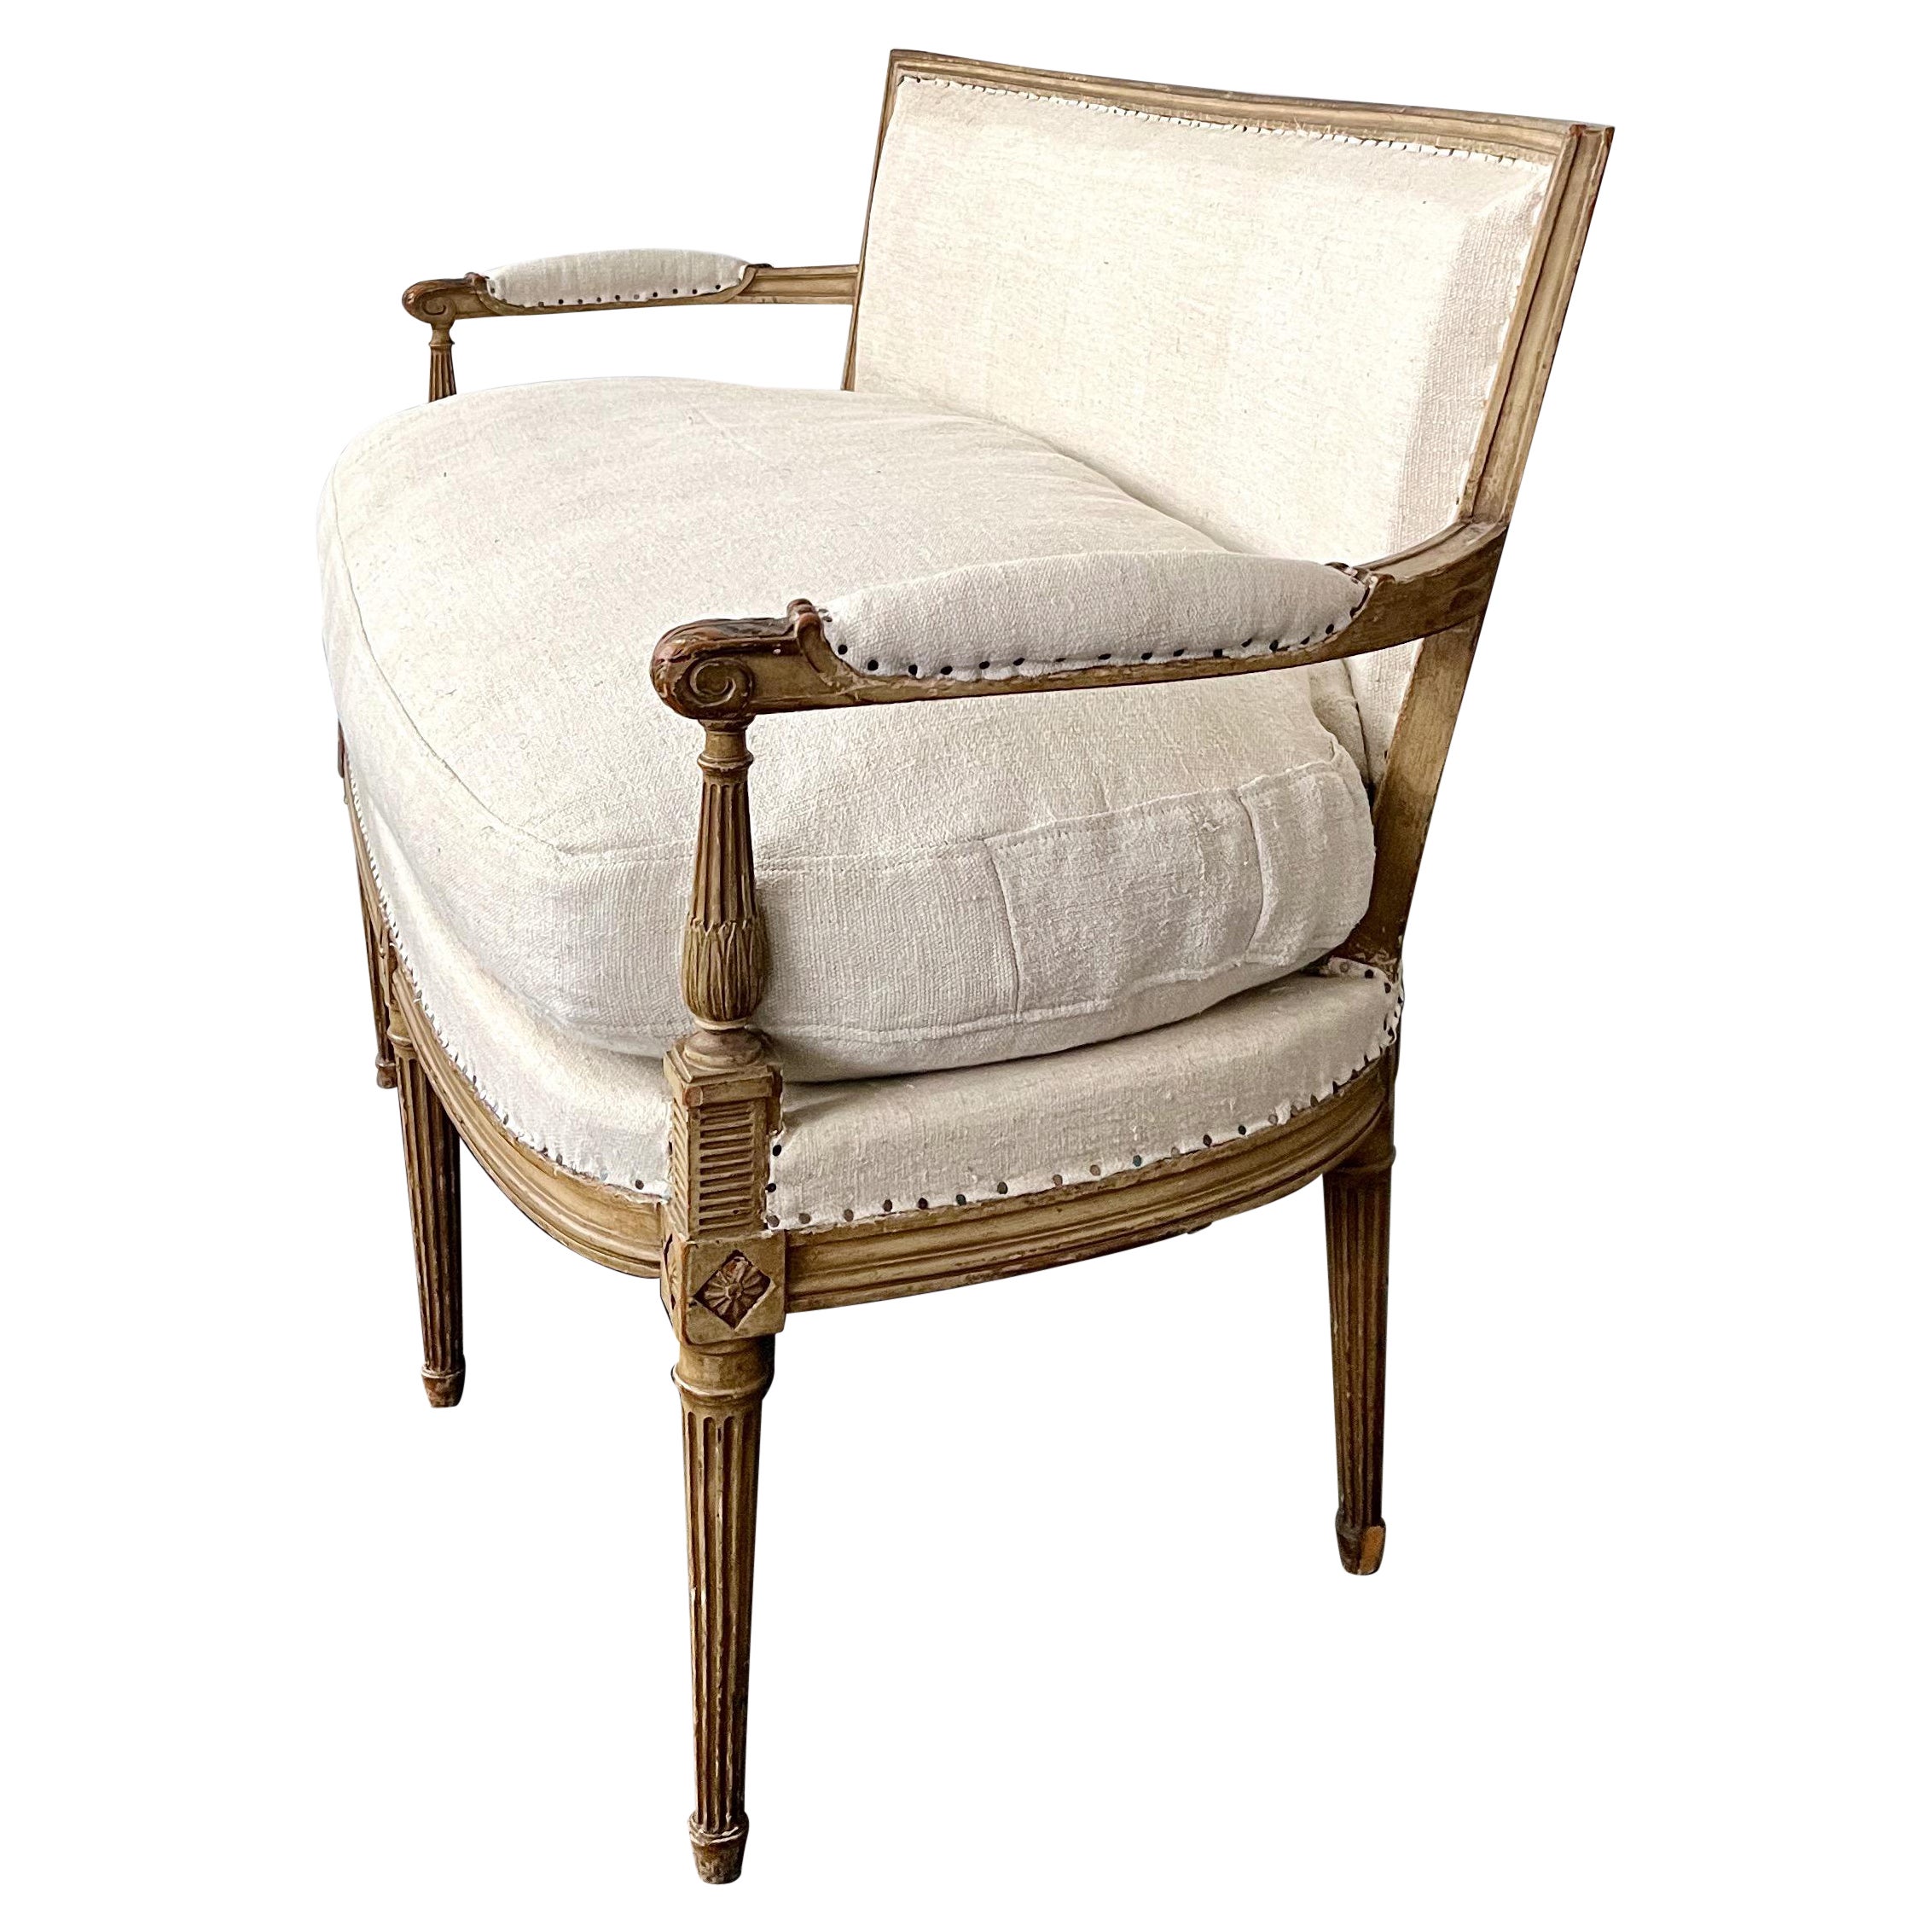 19th century French Louis XVI Style Settee